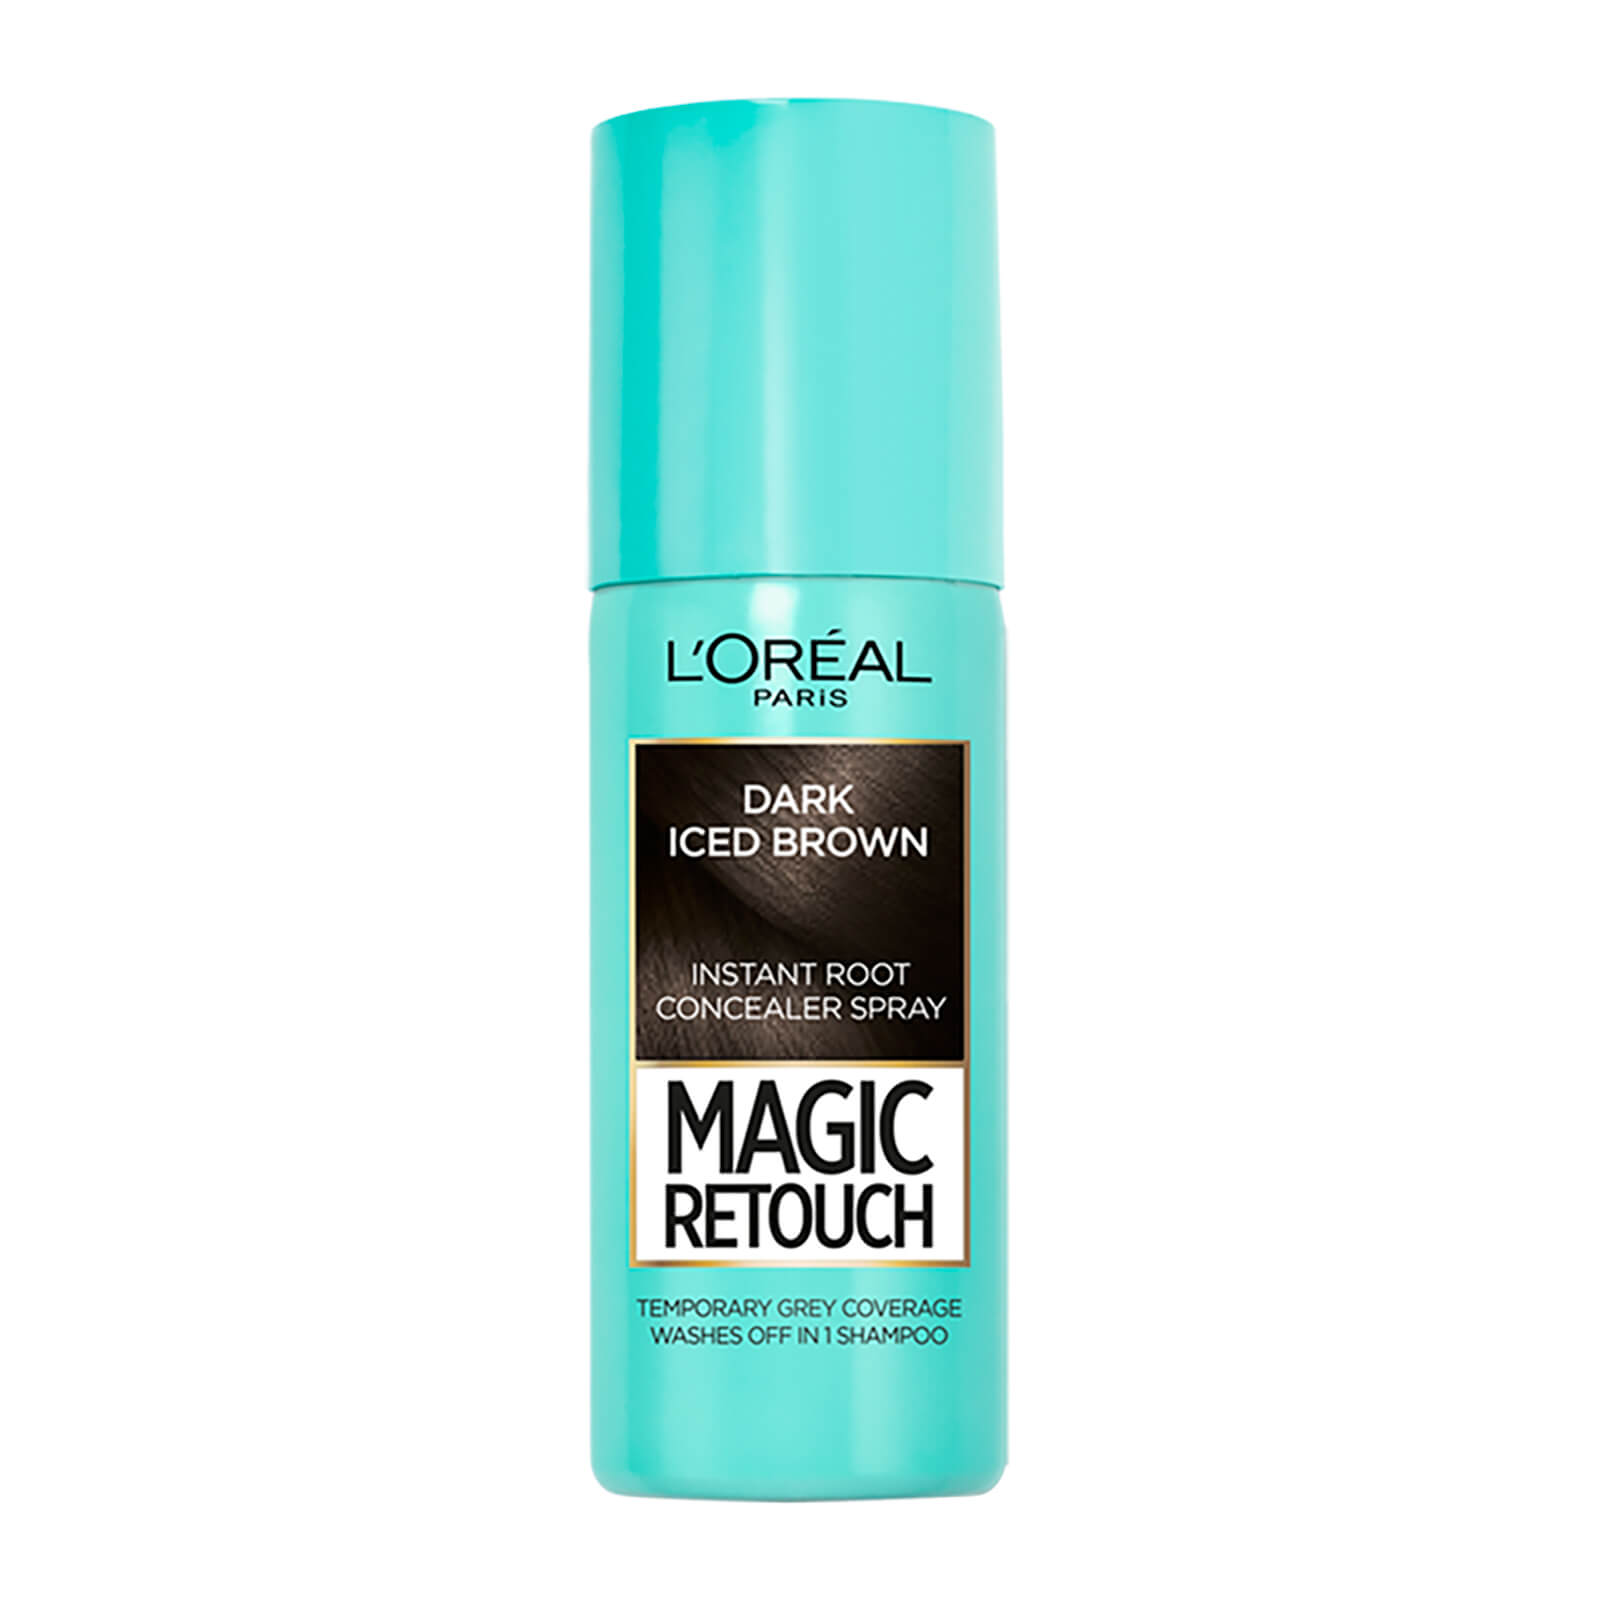 L’Oréal Paris Magic Retouch Temporary Instant Root Concealer Spray 75ml (Various Shades) - Dark Iced Brown